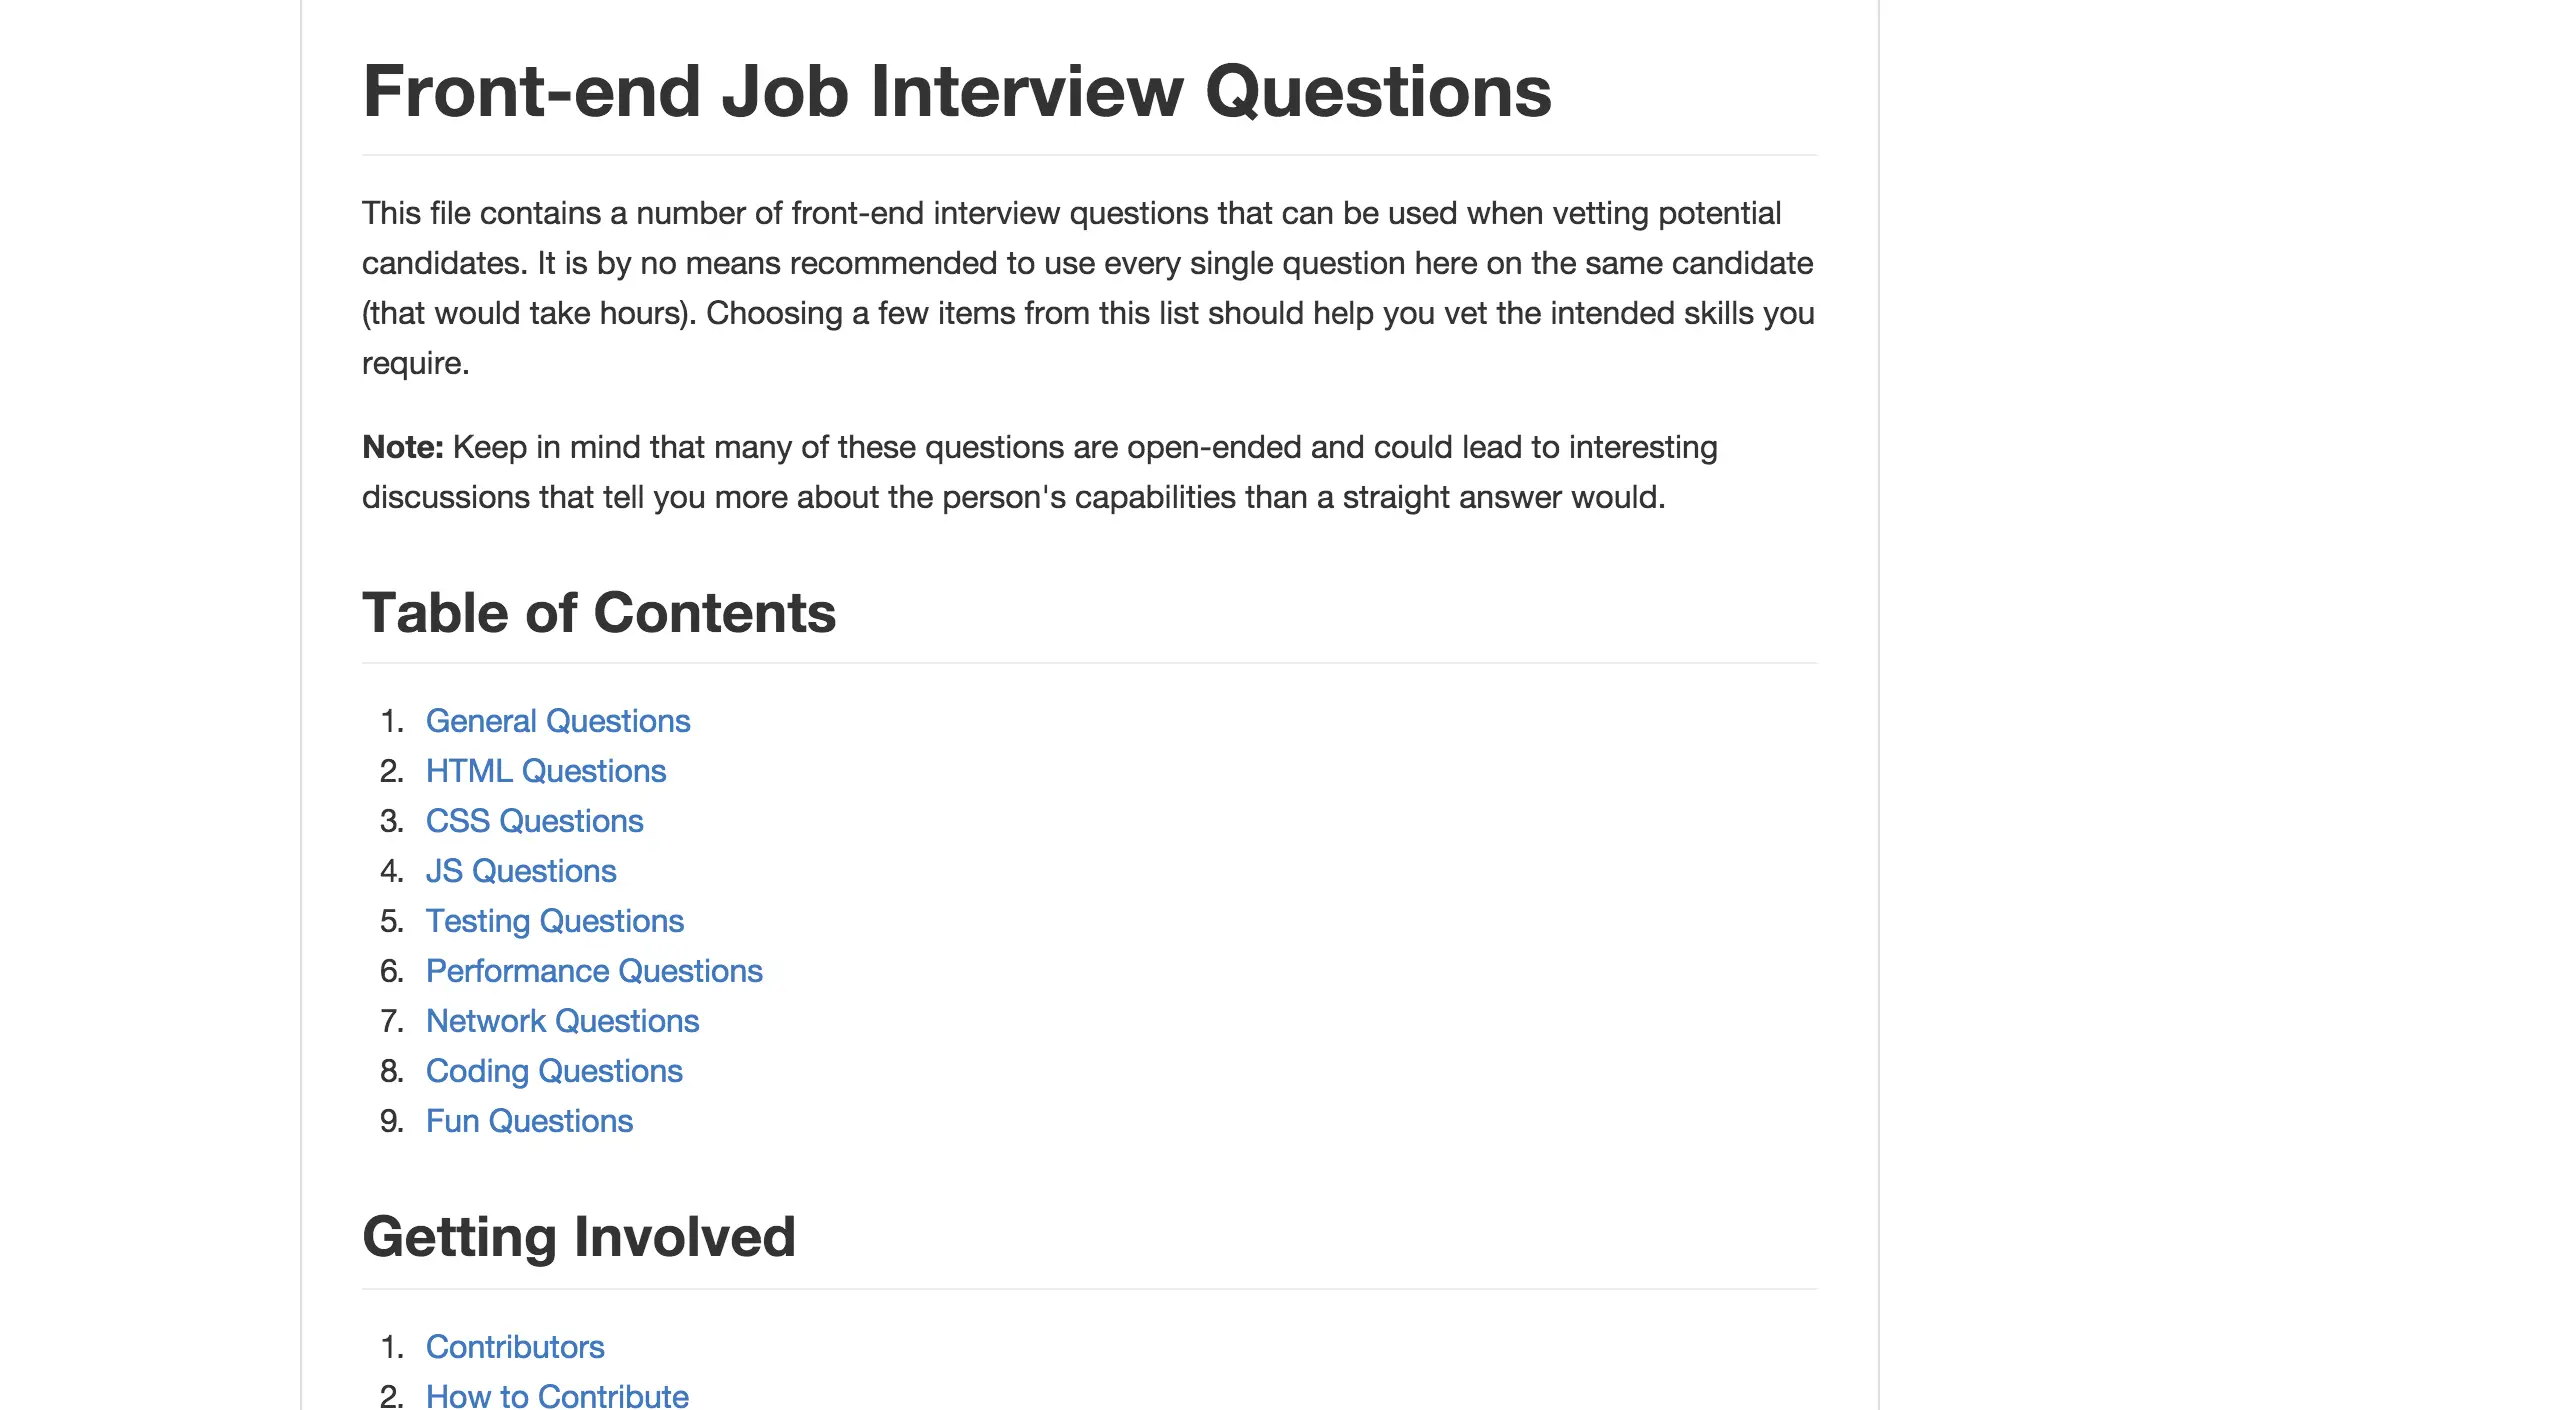 Common #FrontEnd developer interview questions.